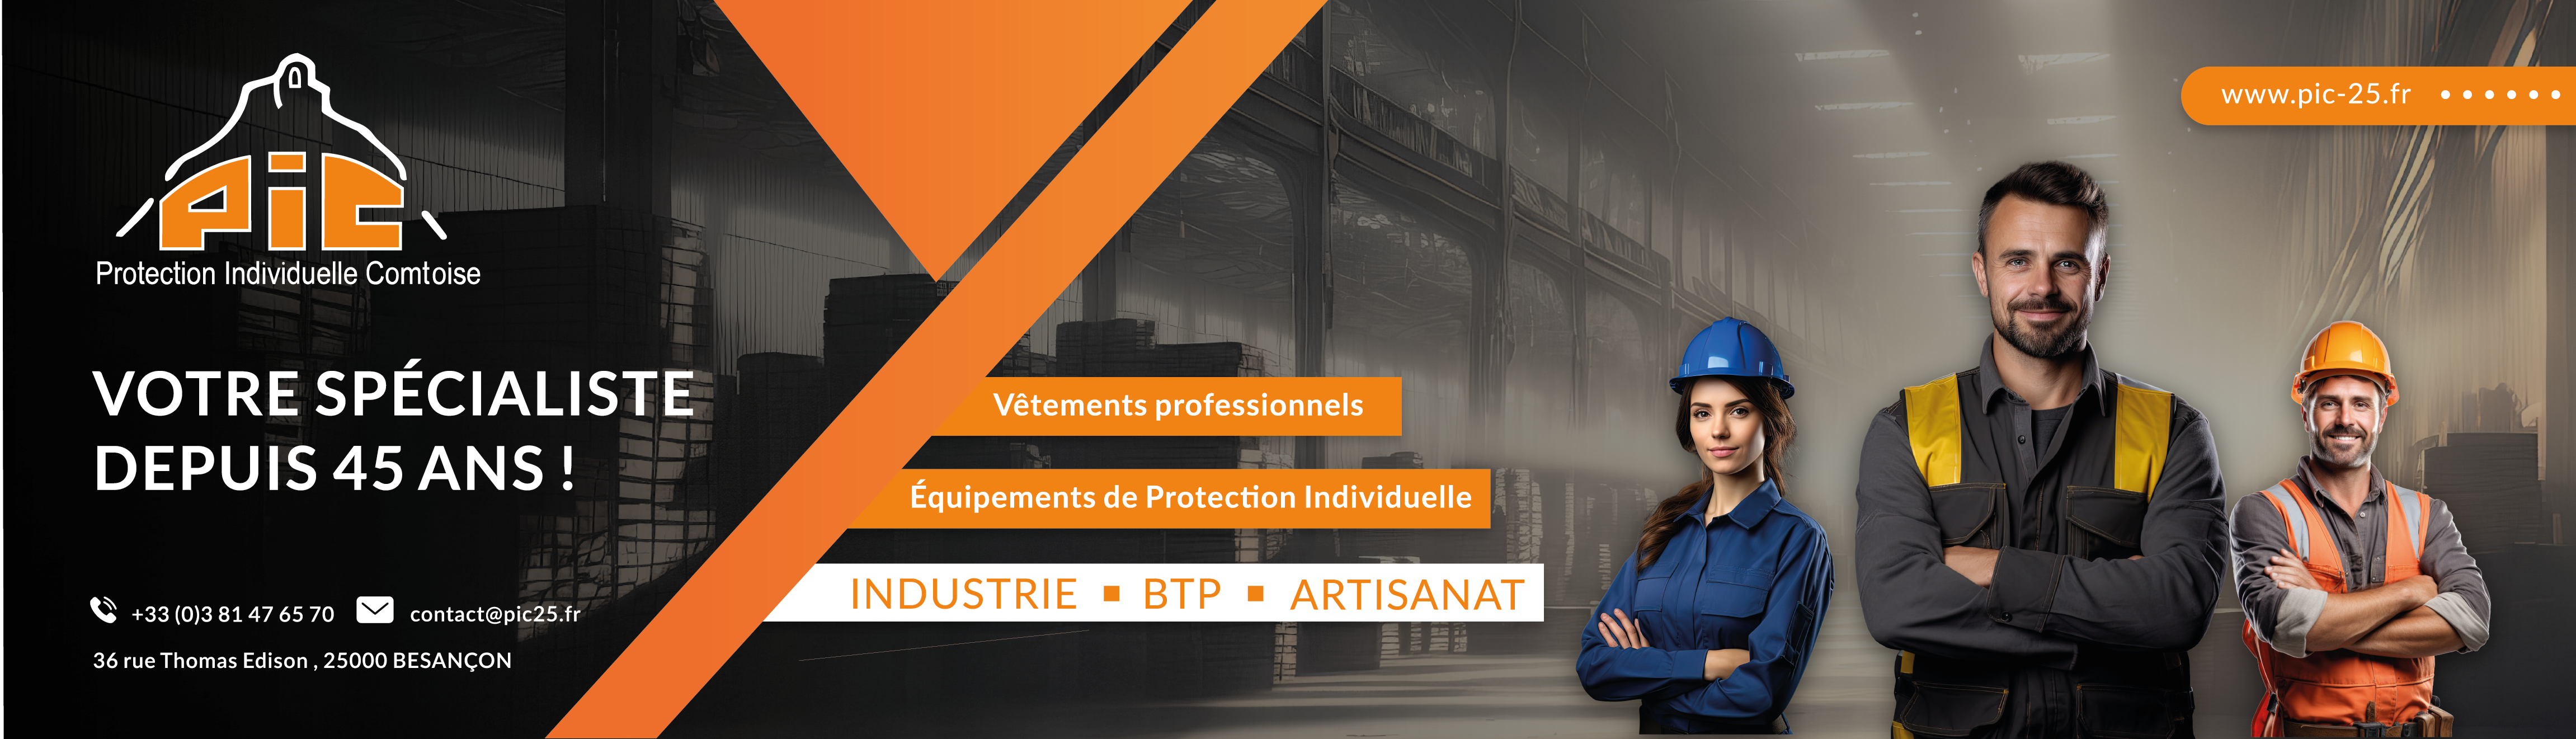 PIC - PROTECTION INDIVIDUELLE COMTOISE